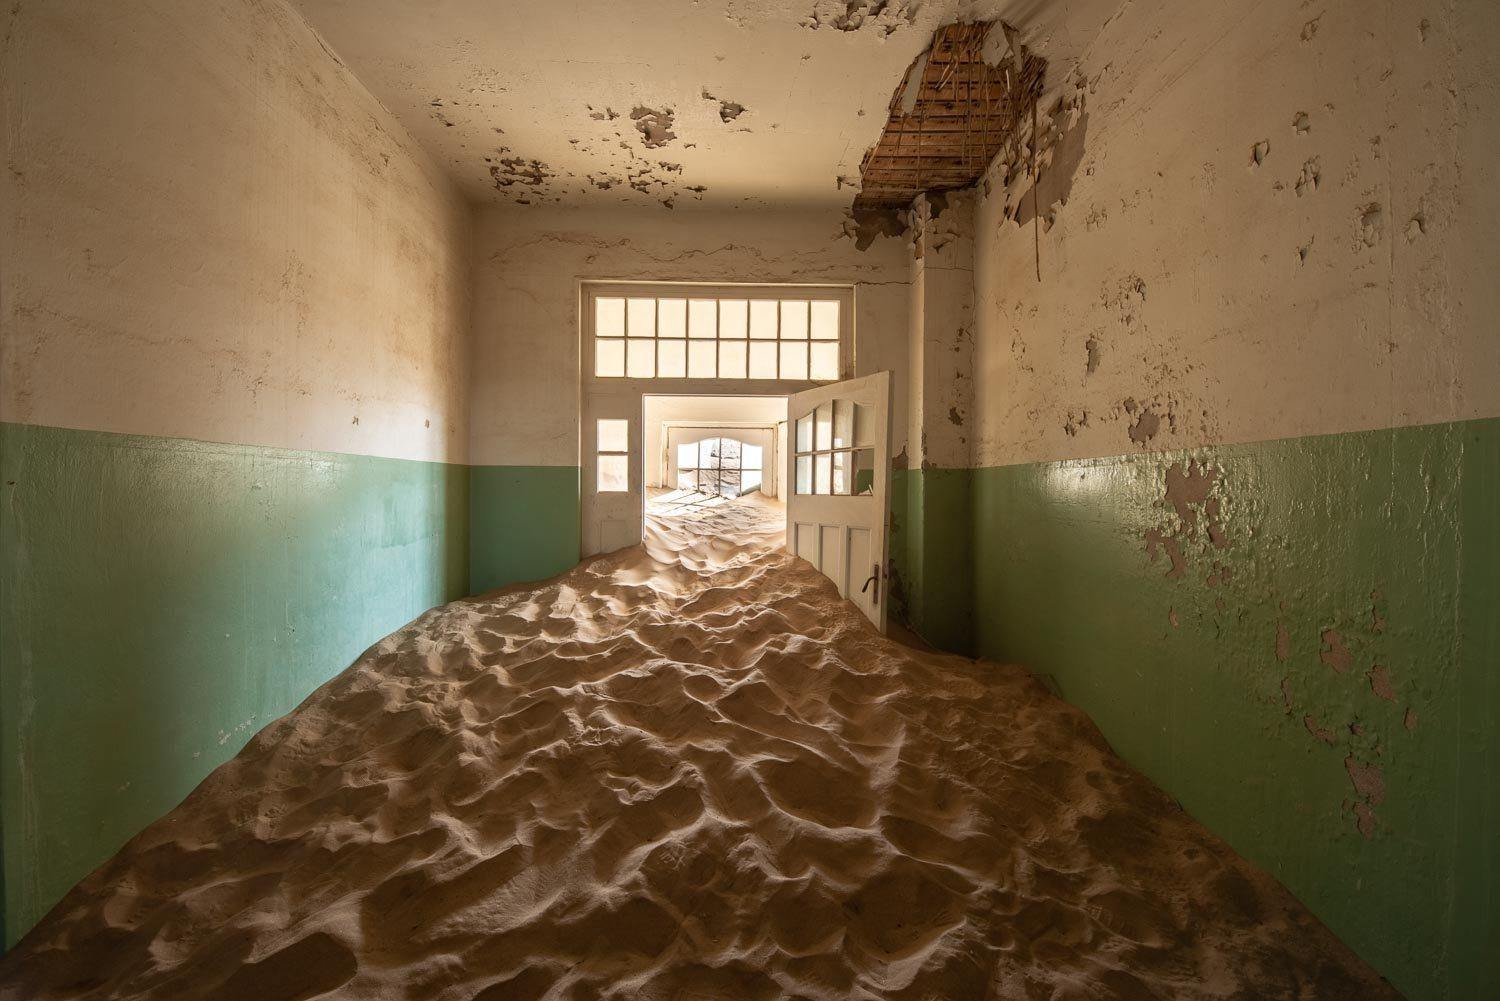 Making of house with a lot of sand inside the hall, Kolmanskop #18